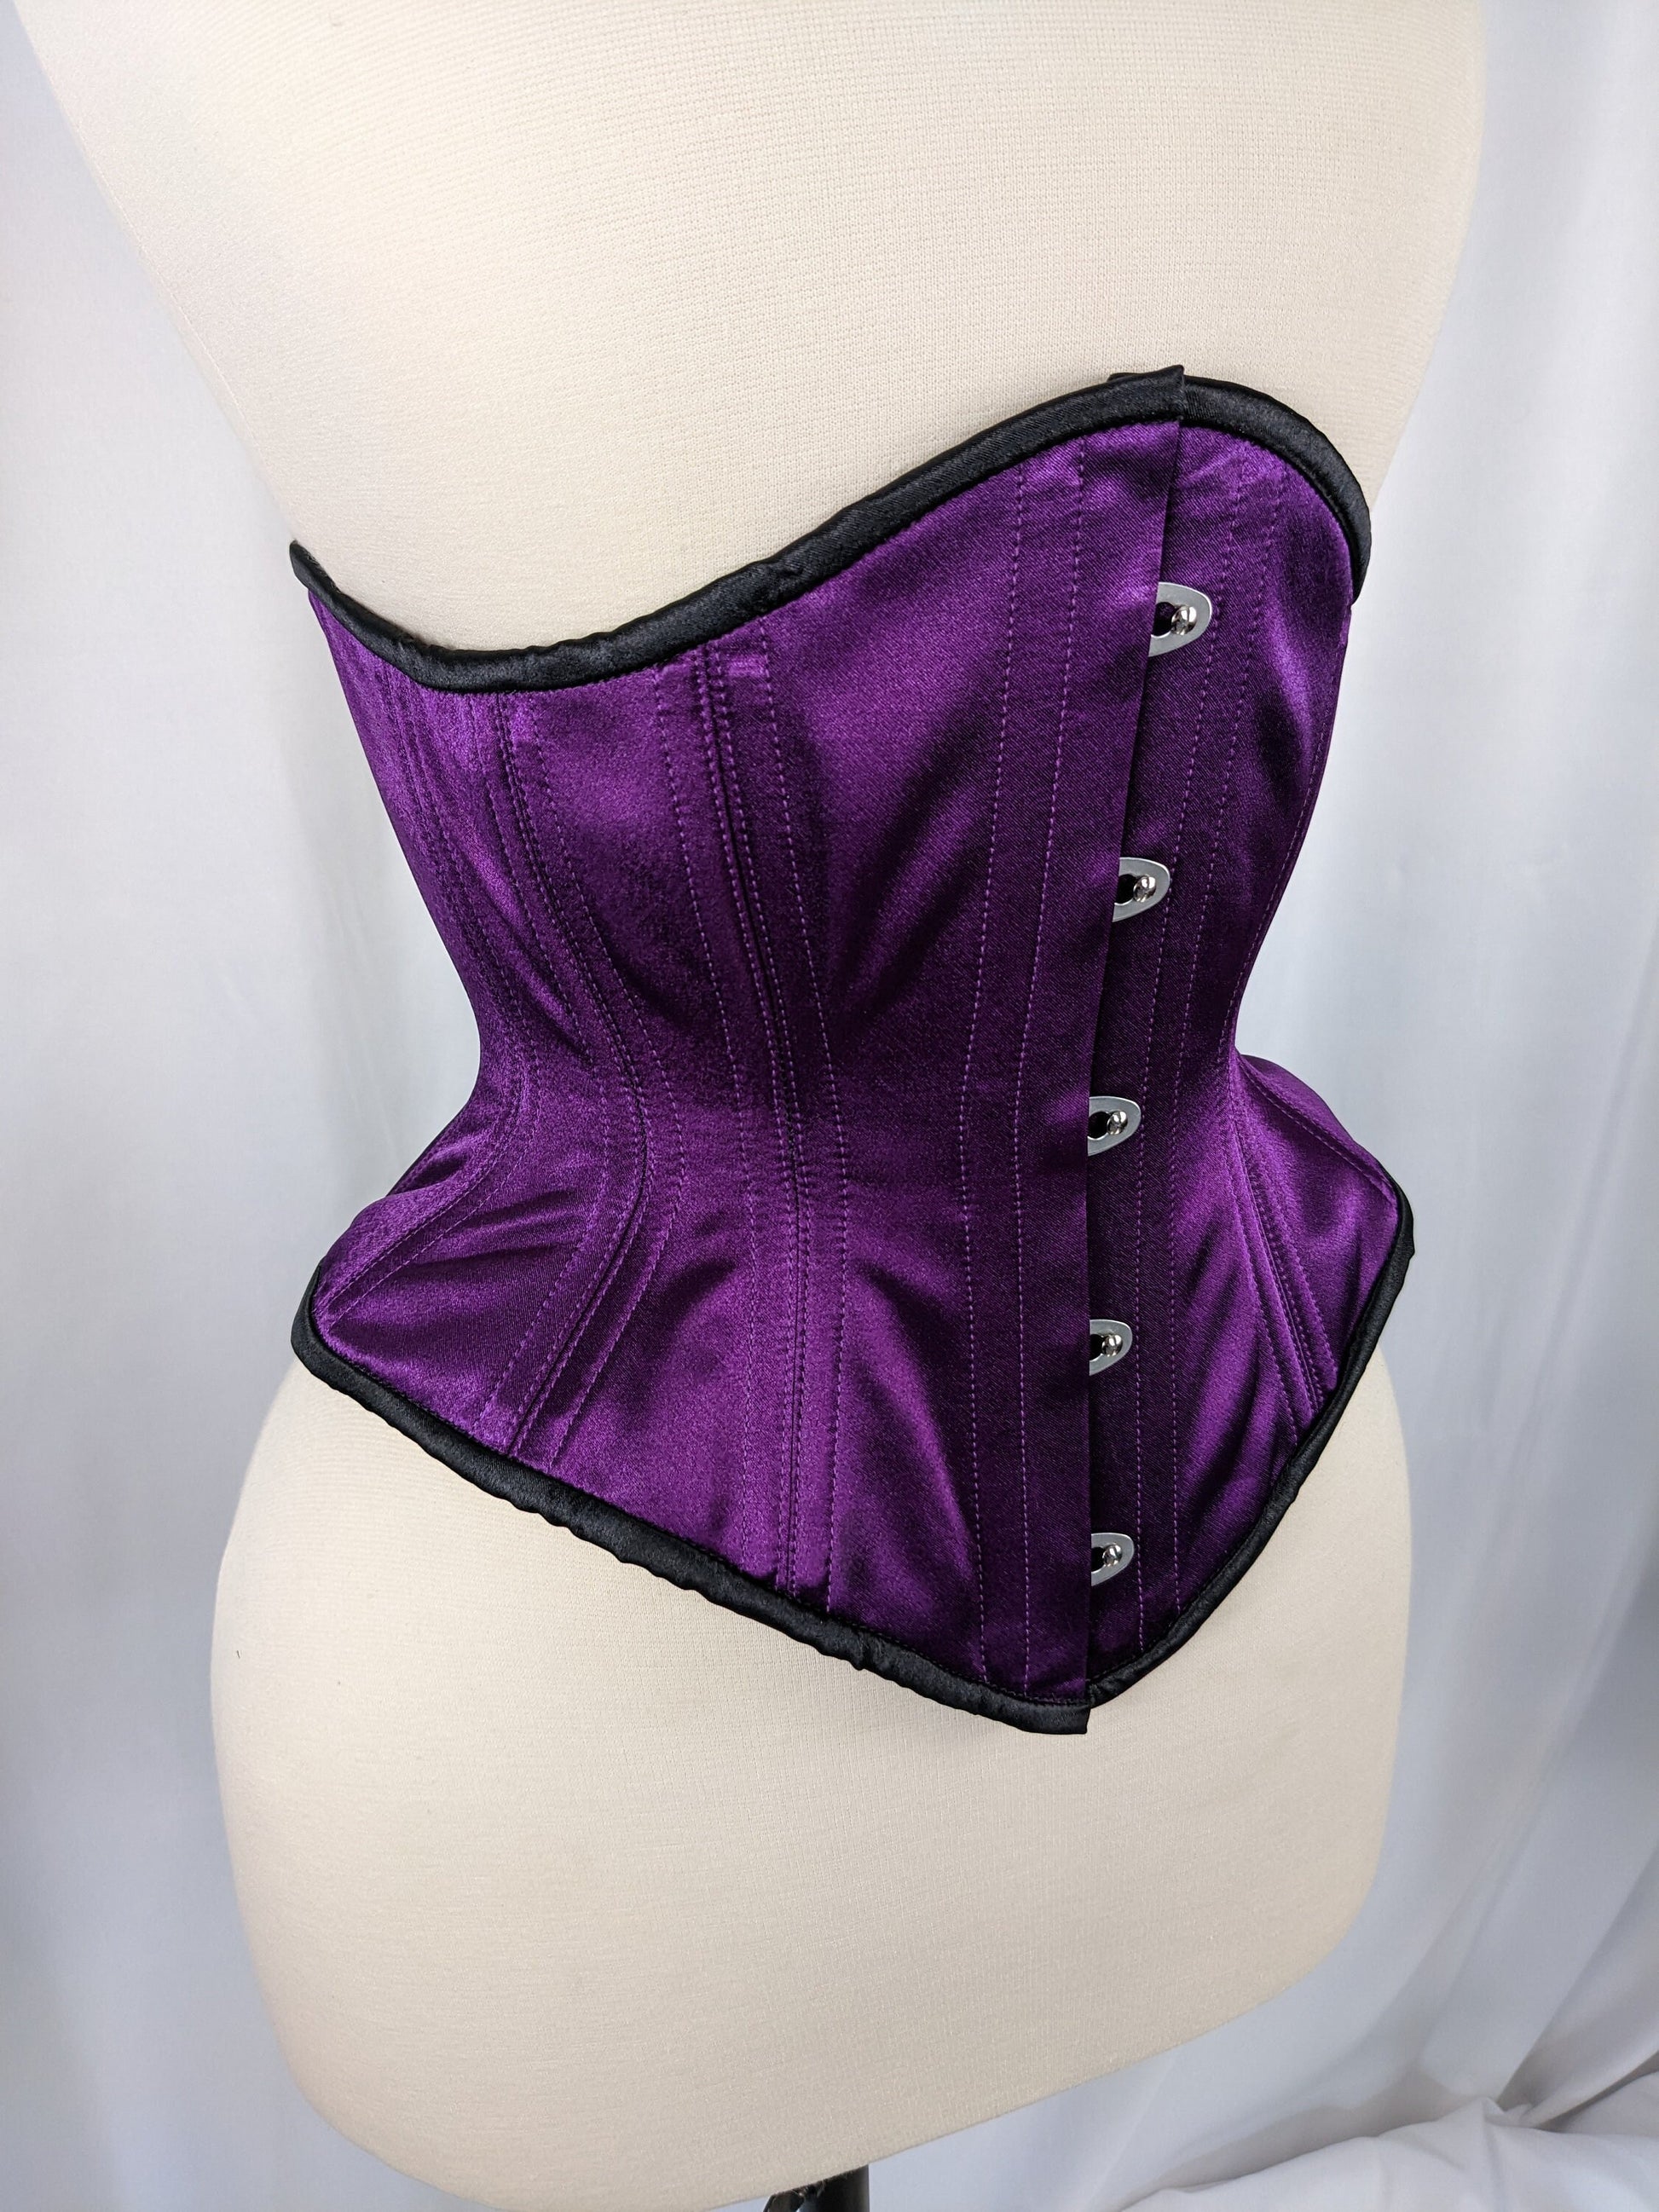 corset underbust C225 in pink and purple satin edged with black -  Boho-Chic Clothing